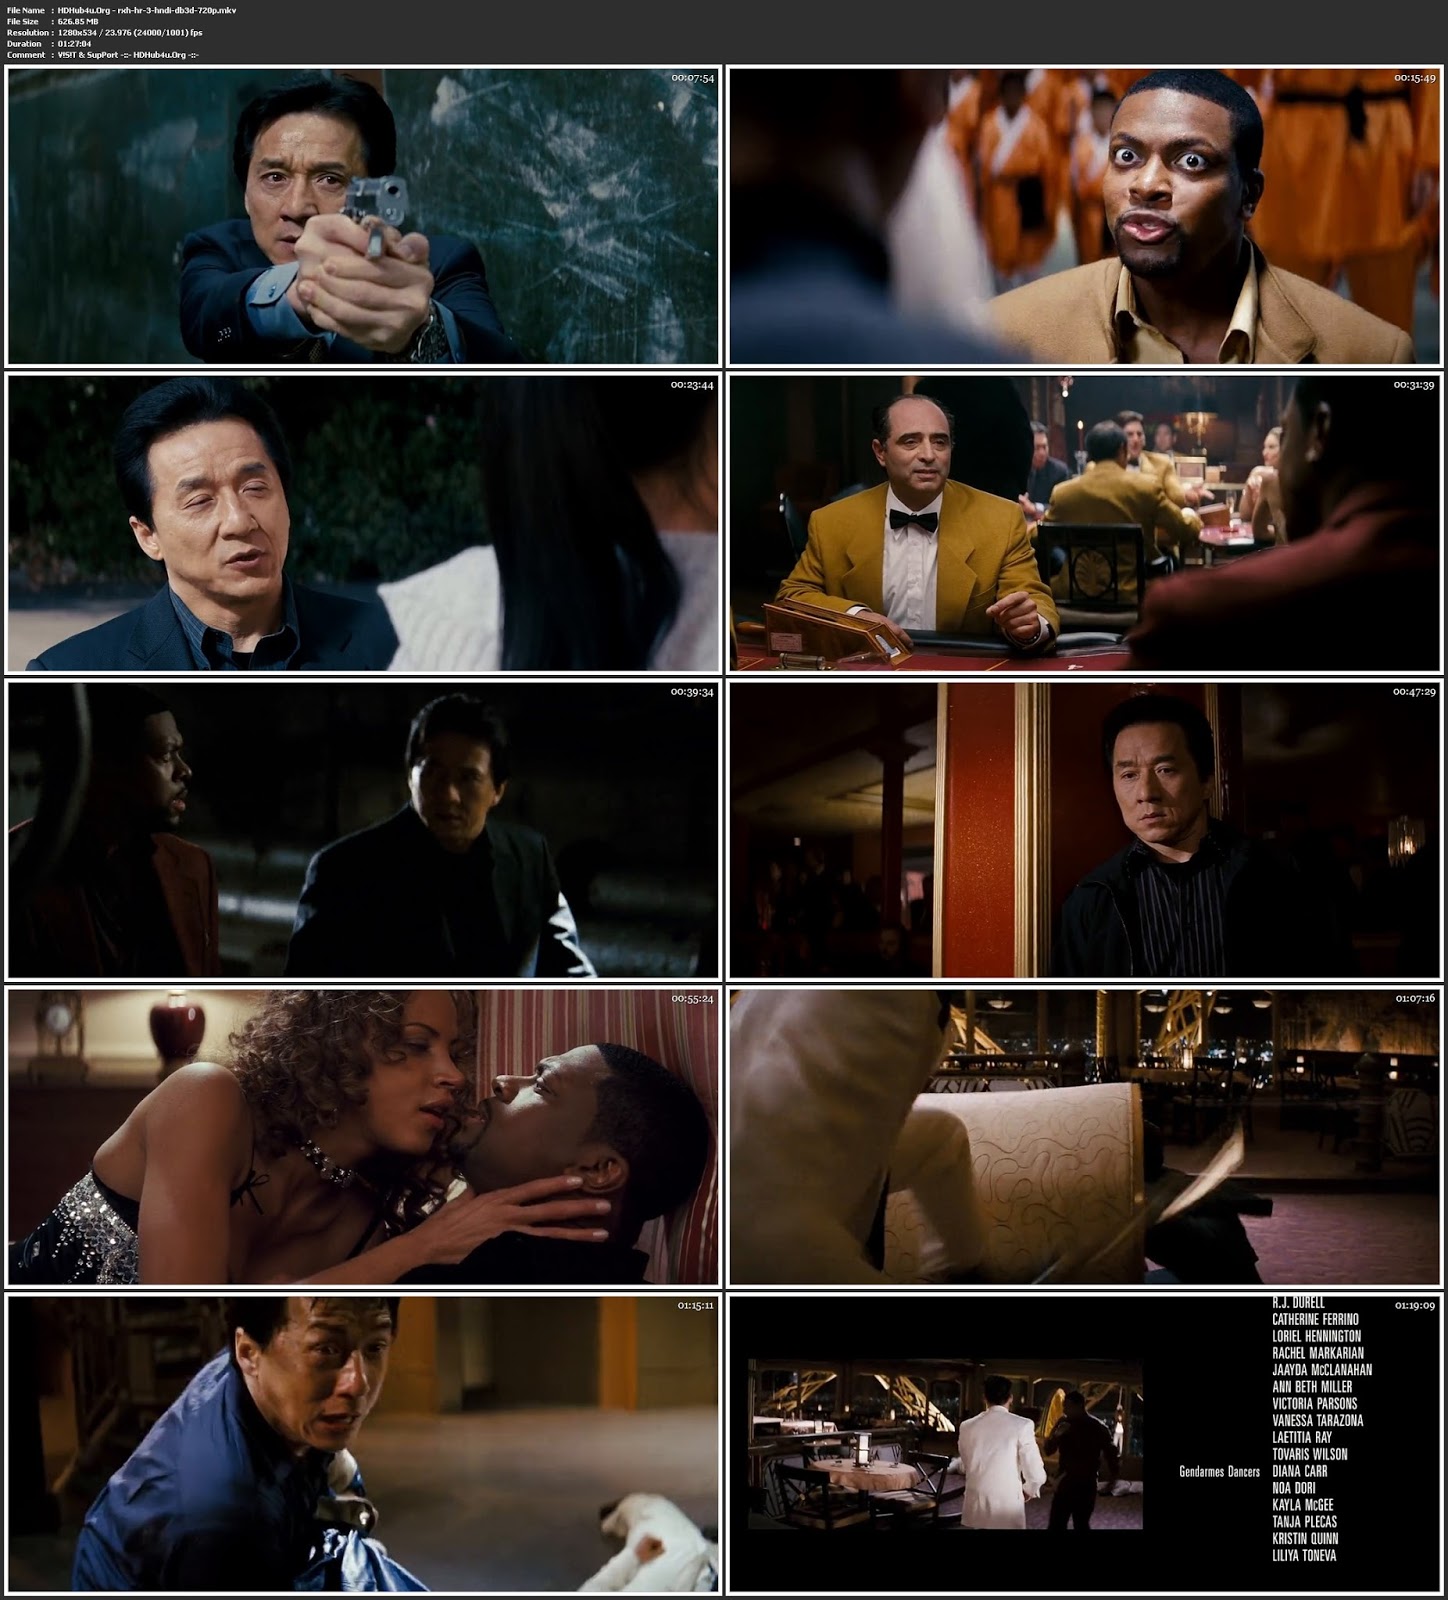 Rush Hour 3 (2007) Hindi Dubbed 720p BluRay 600MB Download